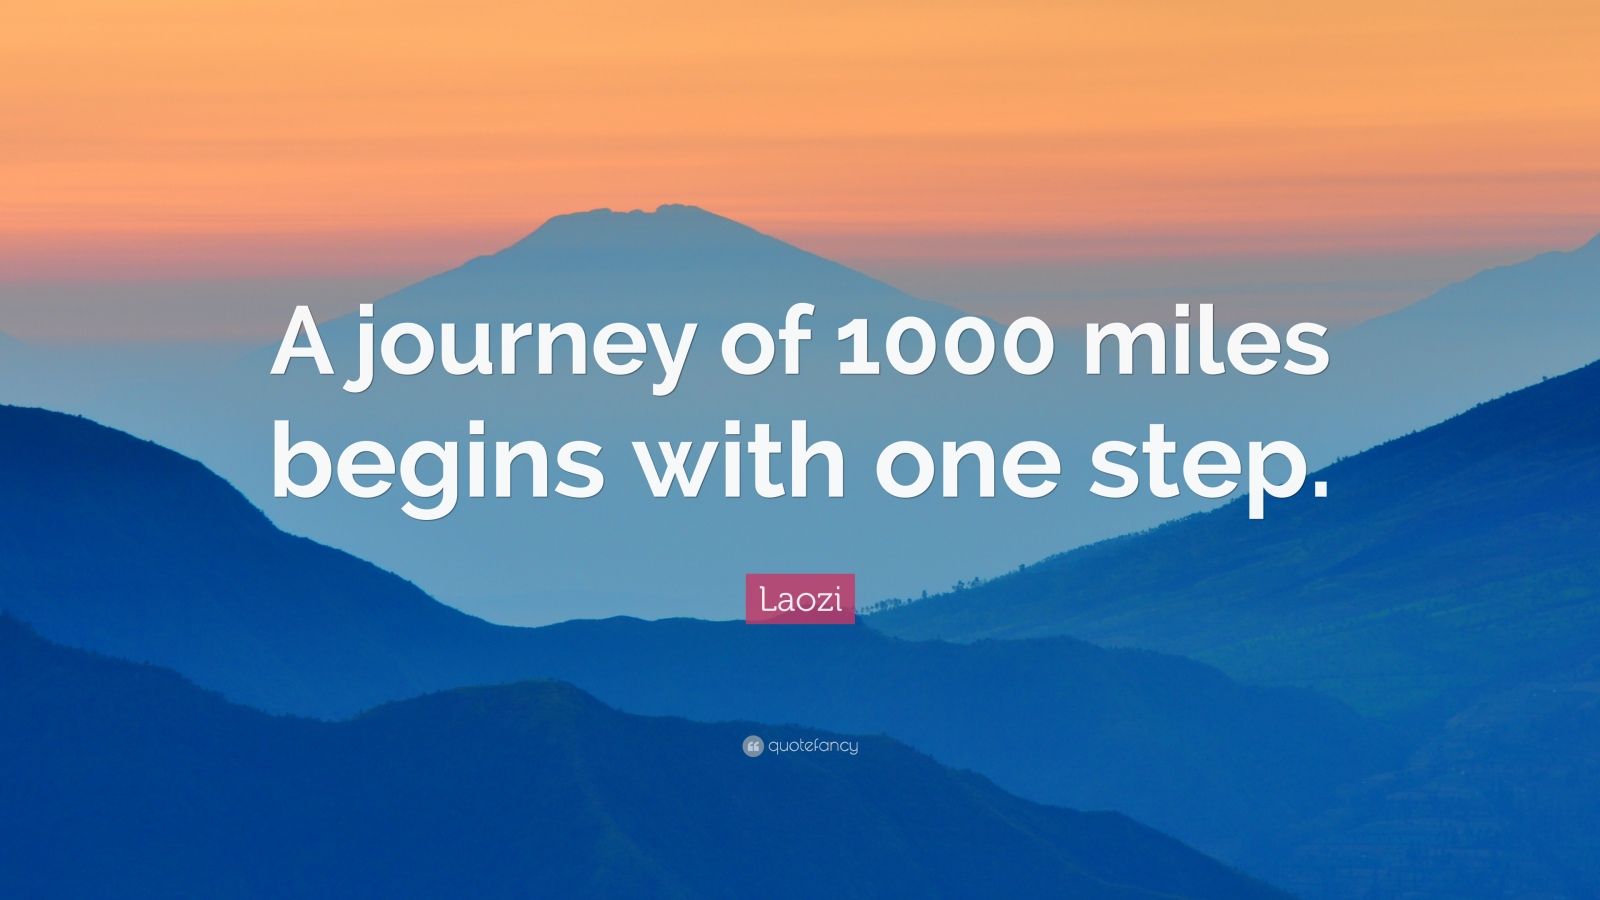 Laozi Quote: “A journey of 1000 miles begins with one step.” (12 ...